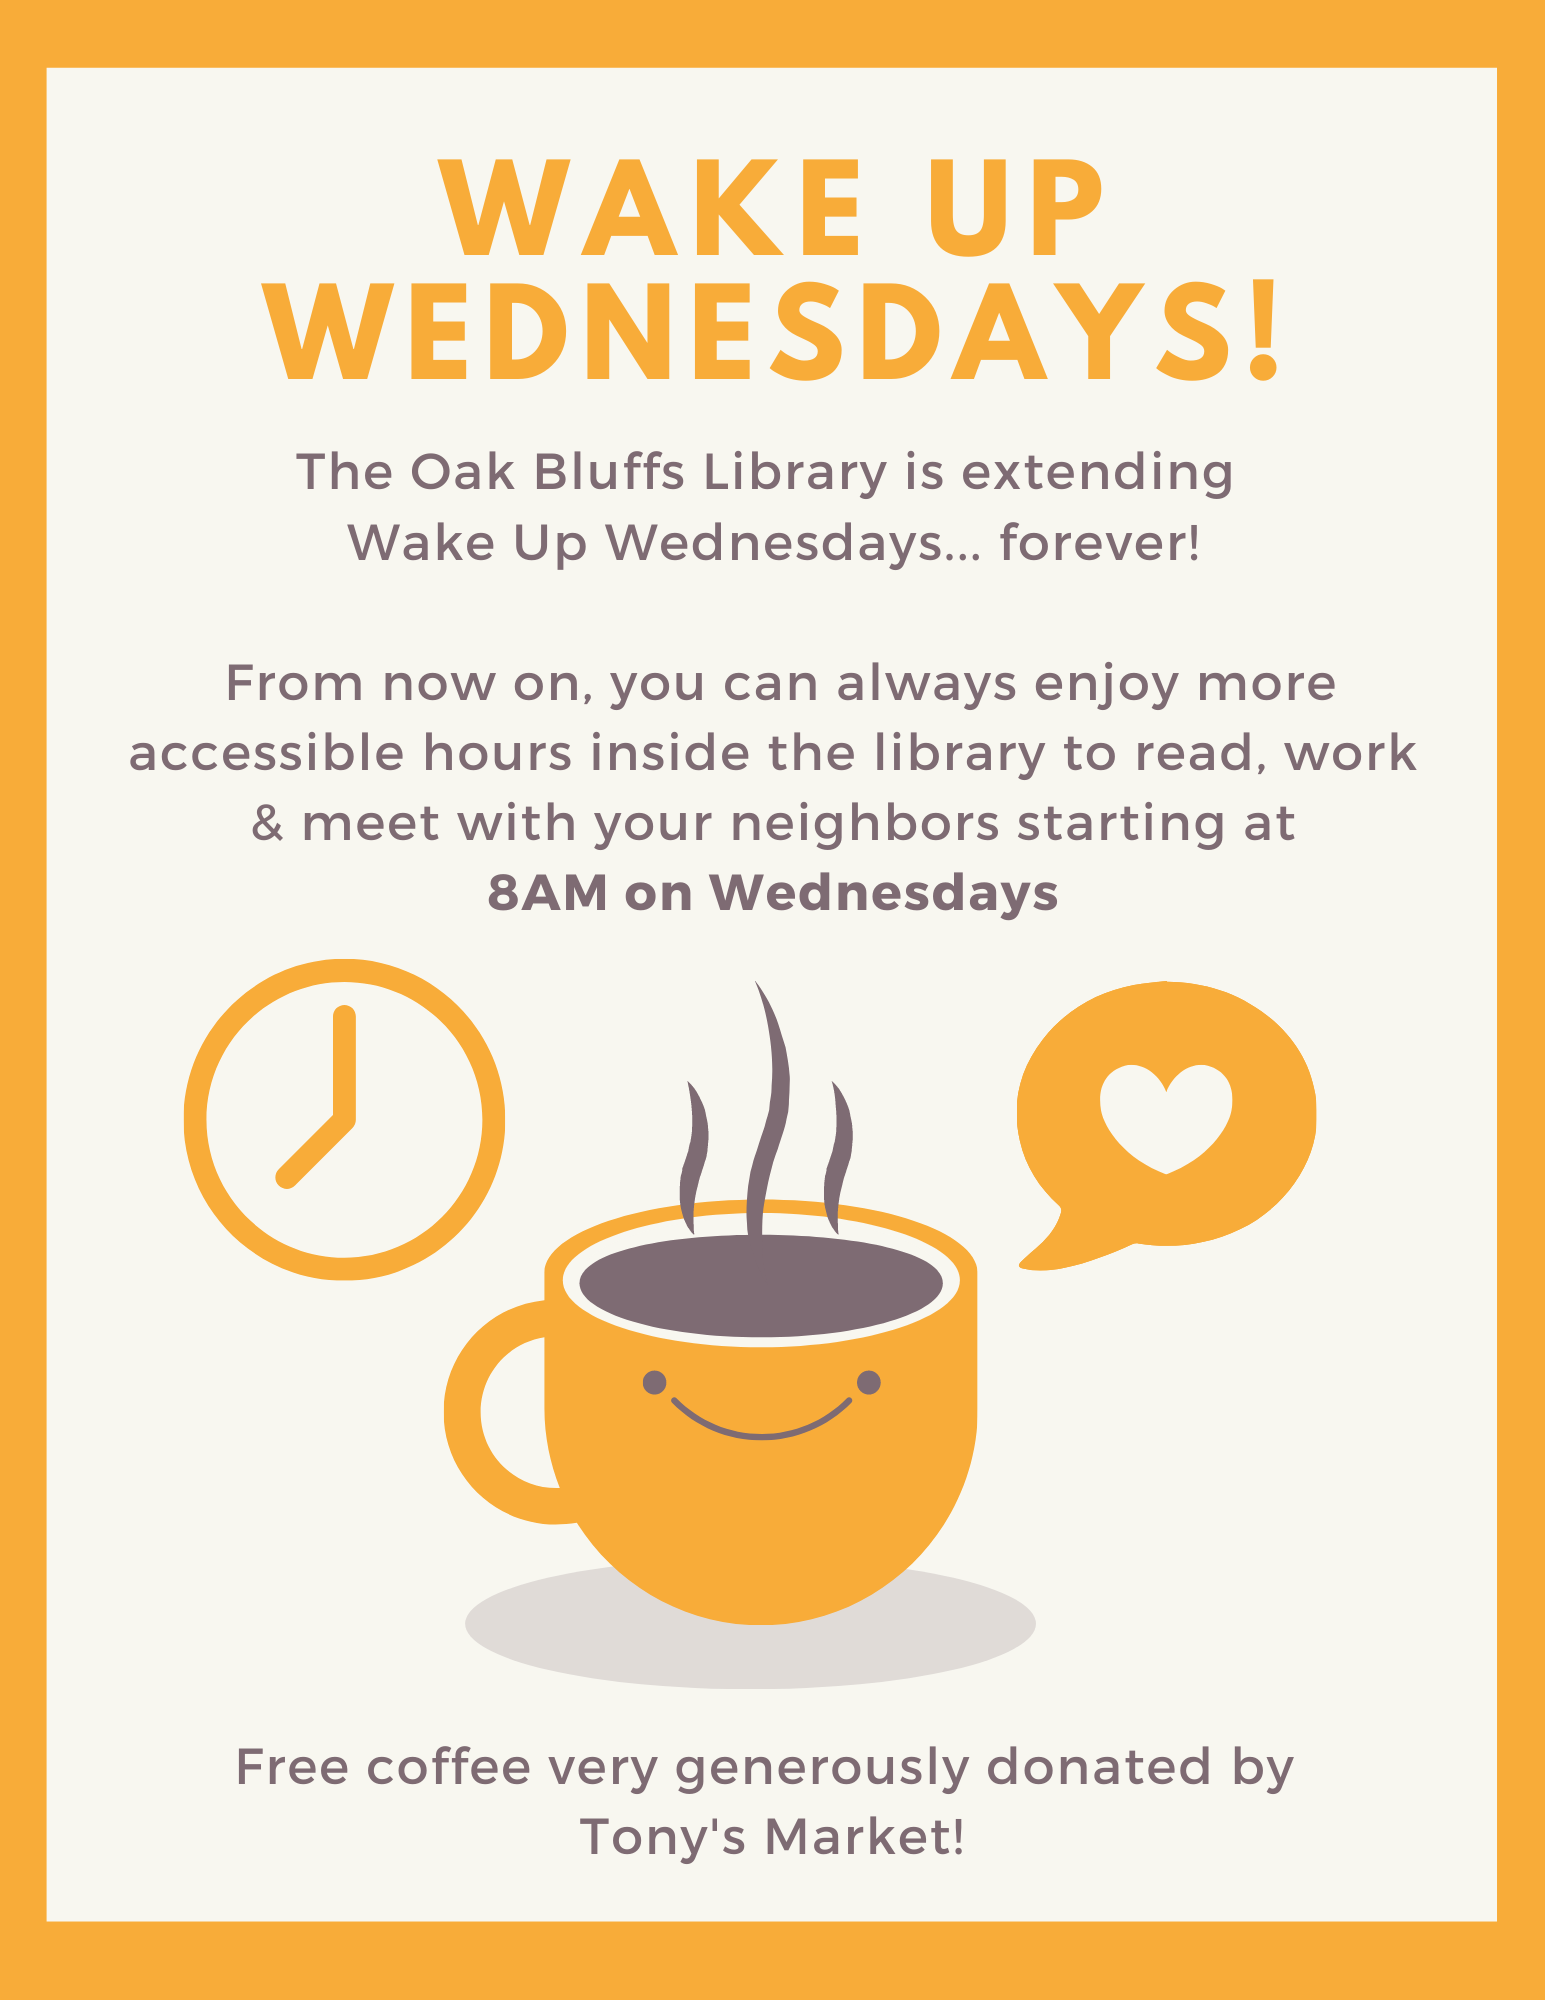 Wake up Wednesday. Library opening at 8 am is permanent change.